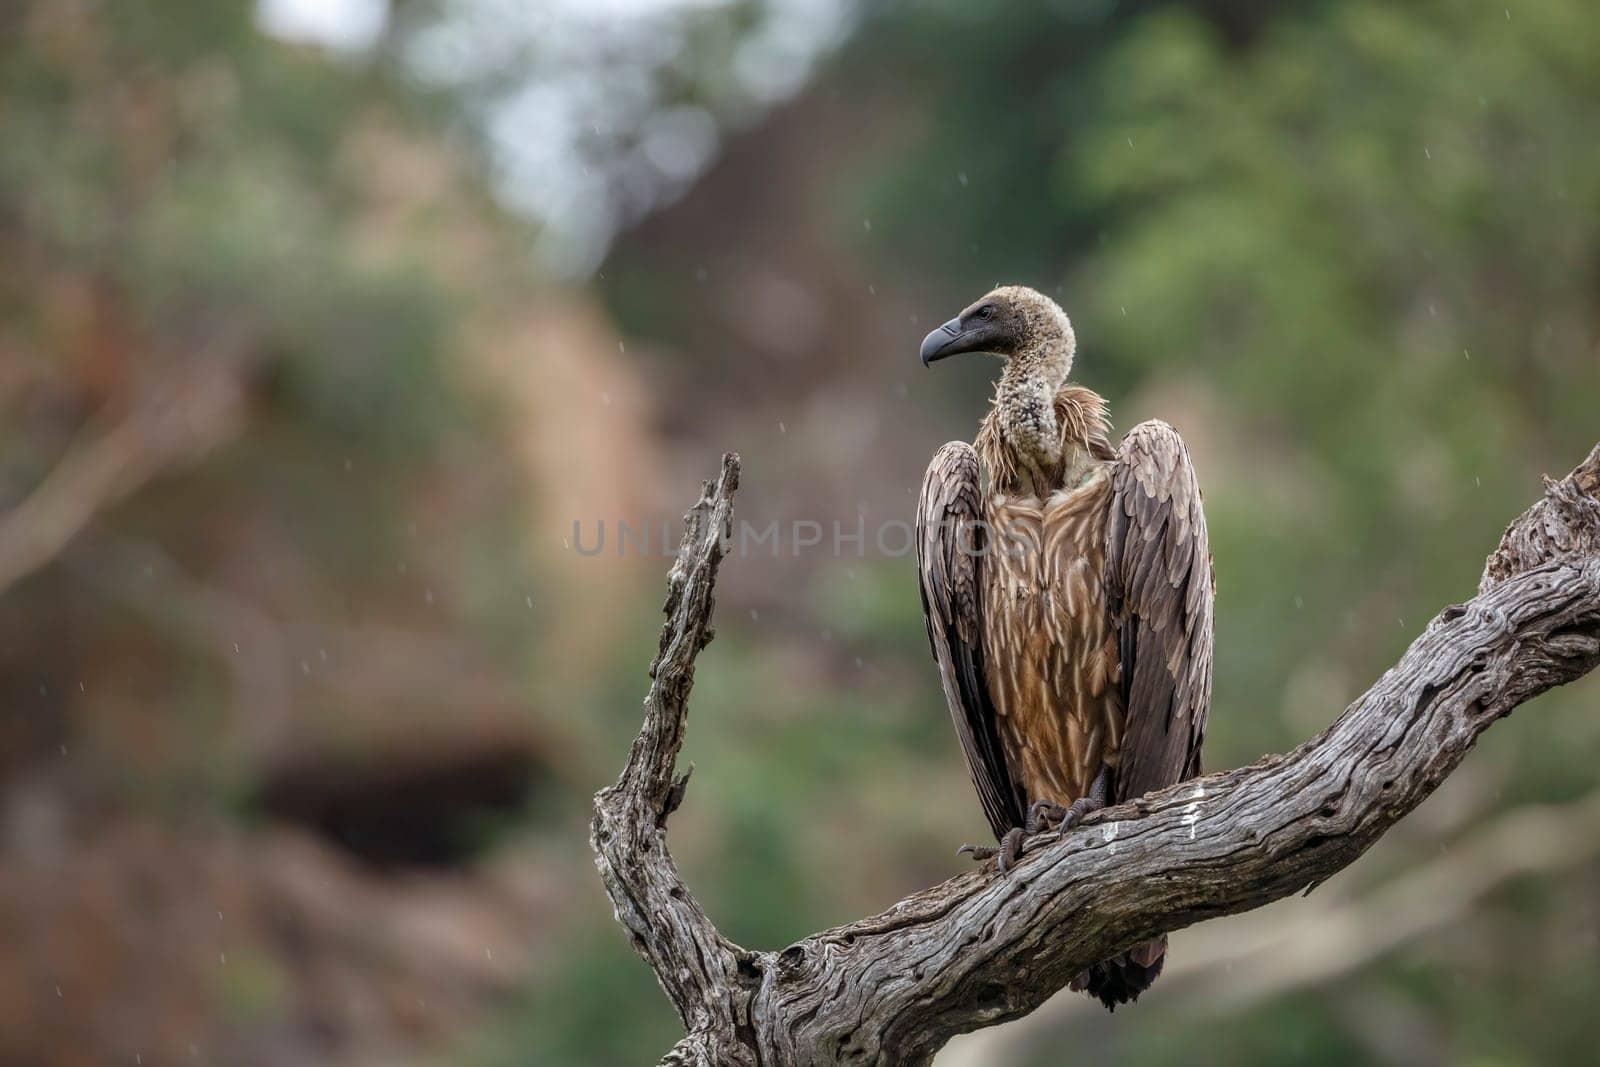 White backed Vulture standing on a log under the rain in Kruger National park, South Africa ; Specie Gyps africanus family of Accipitridae